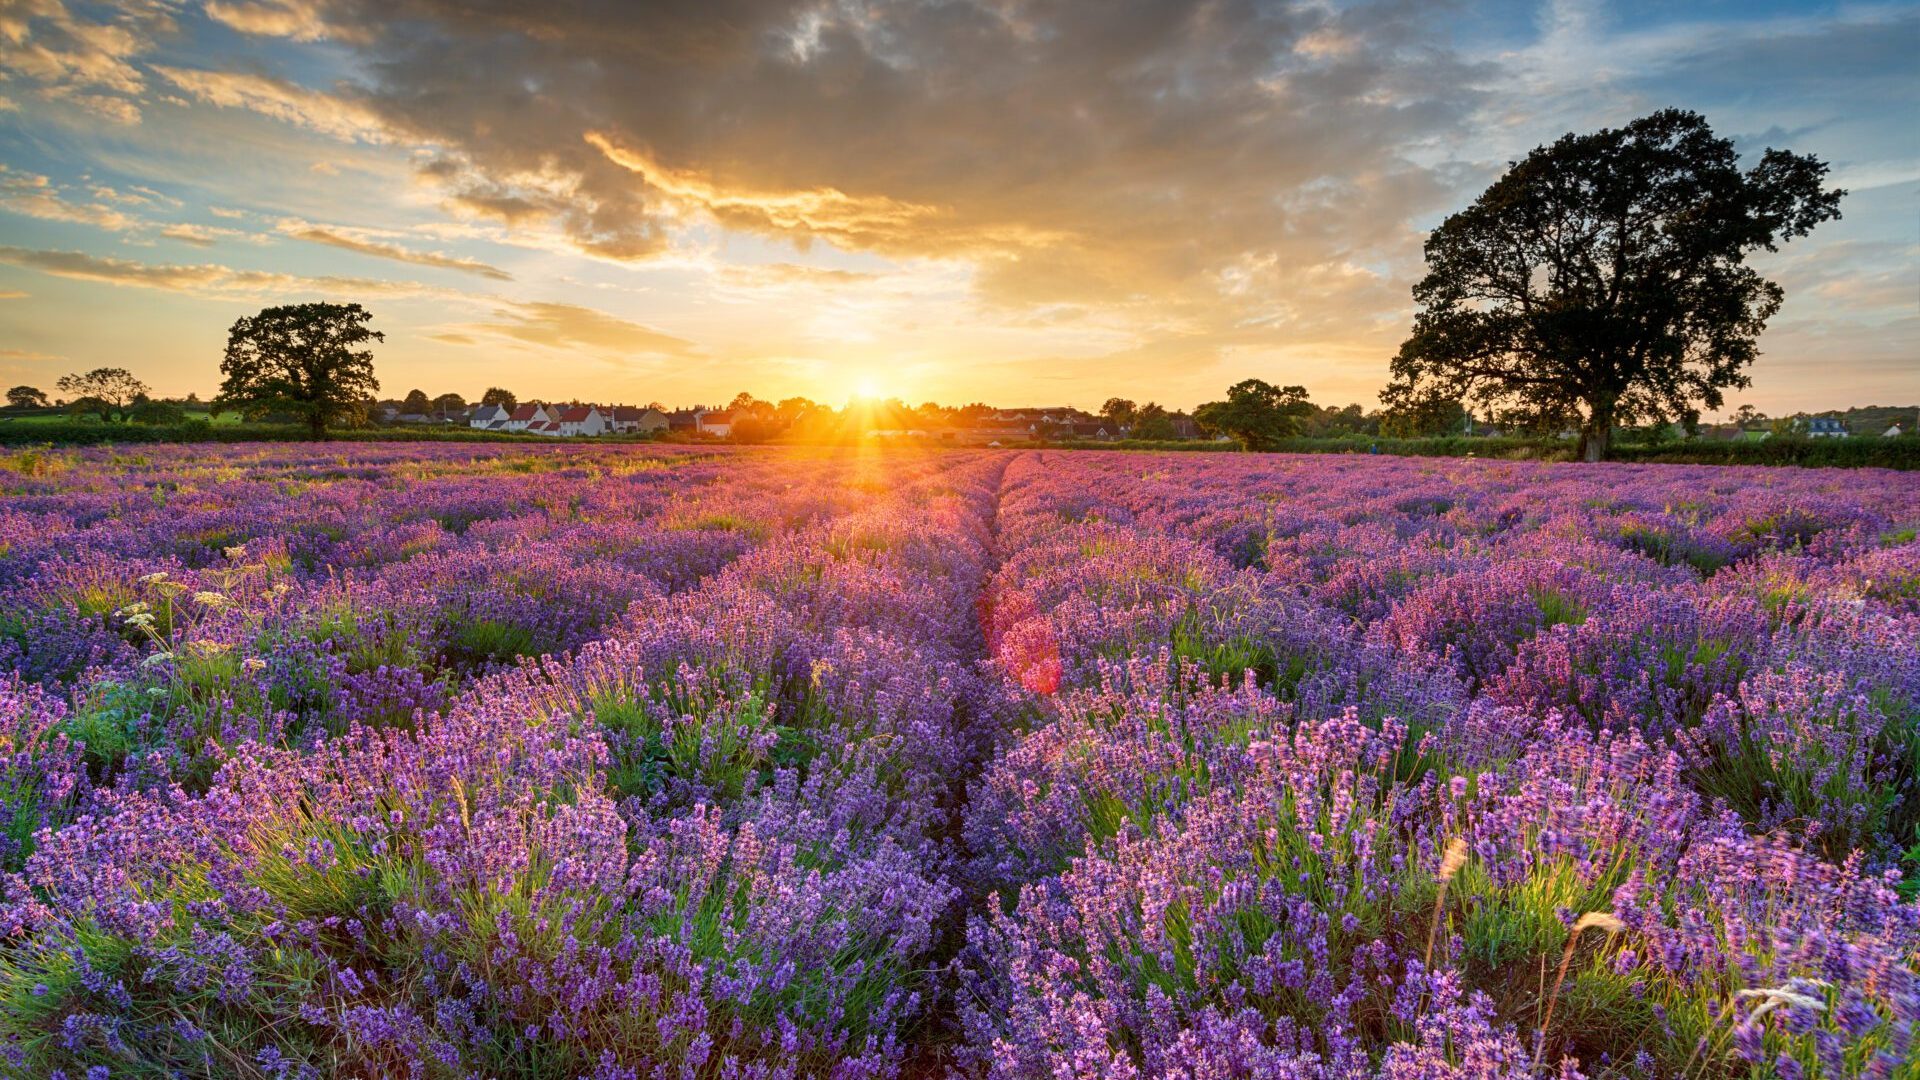 Stunning Sunset Over Fields Of Lavender In Somerset